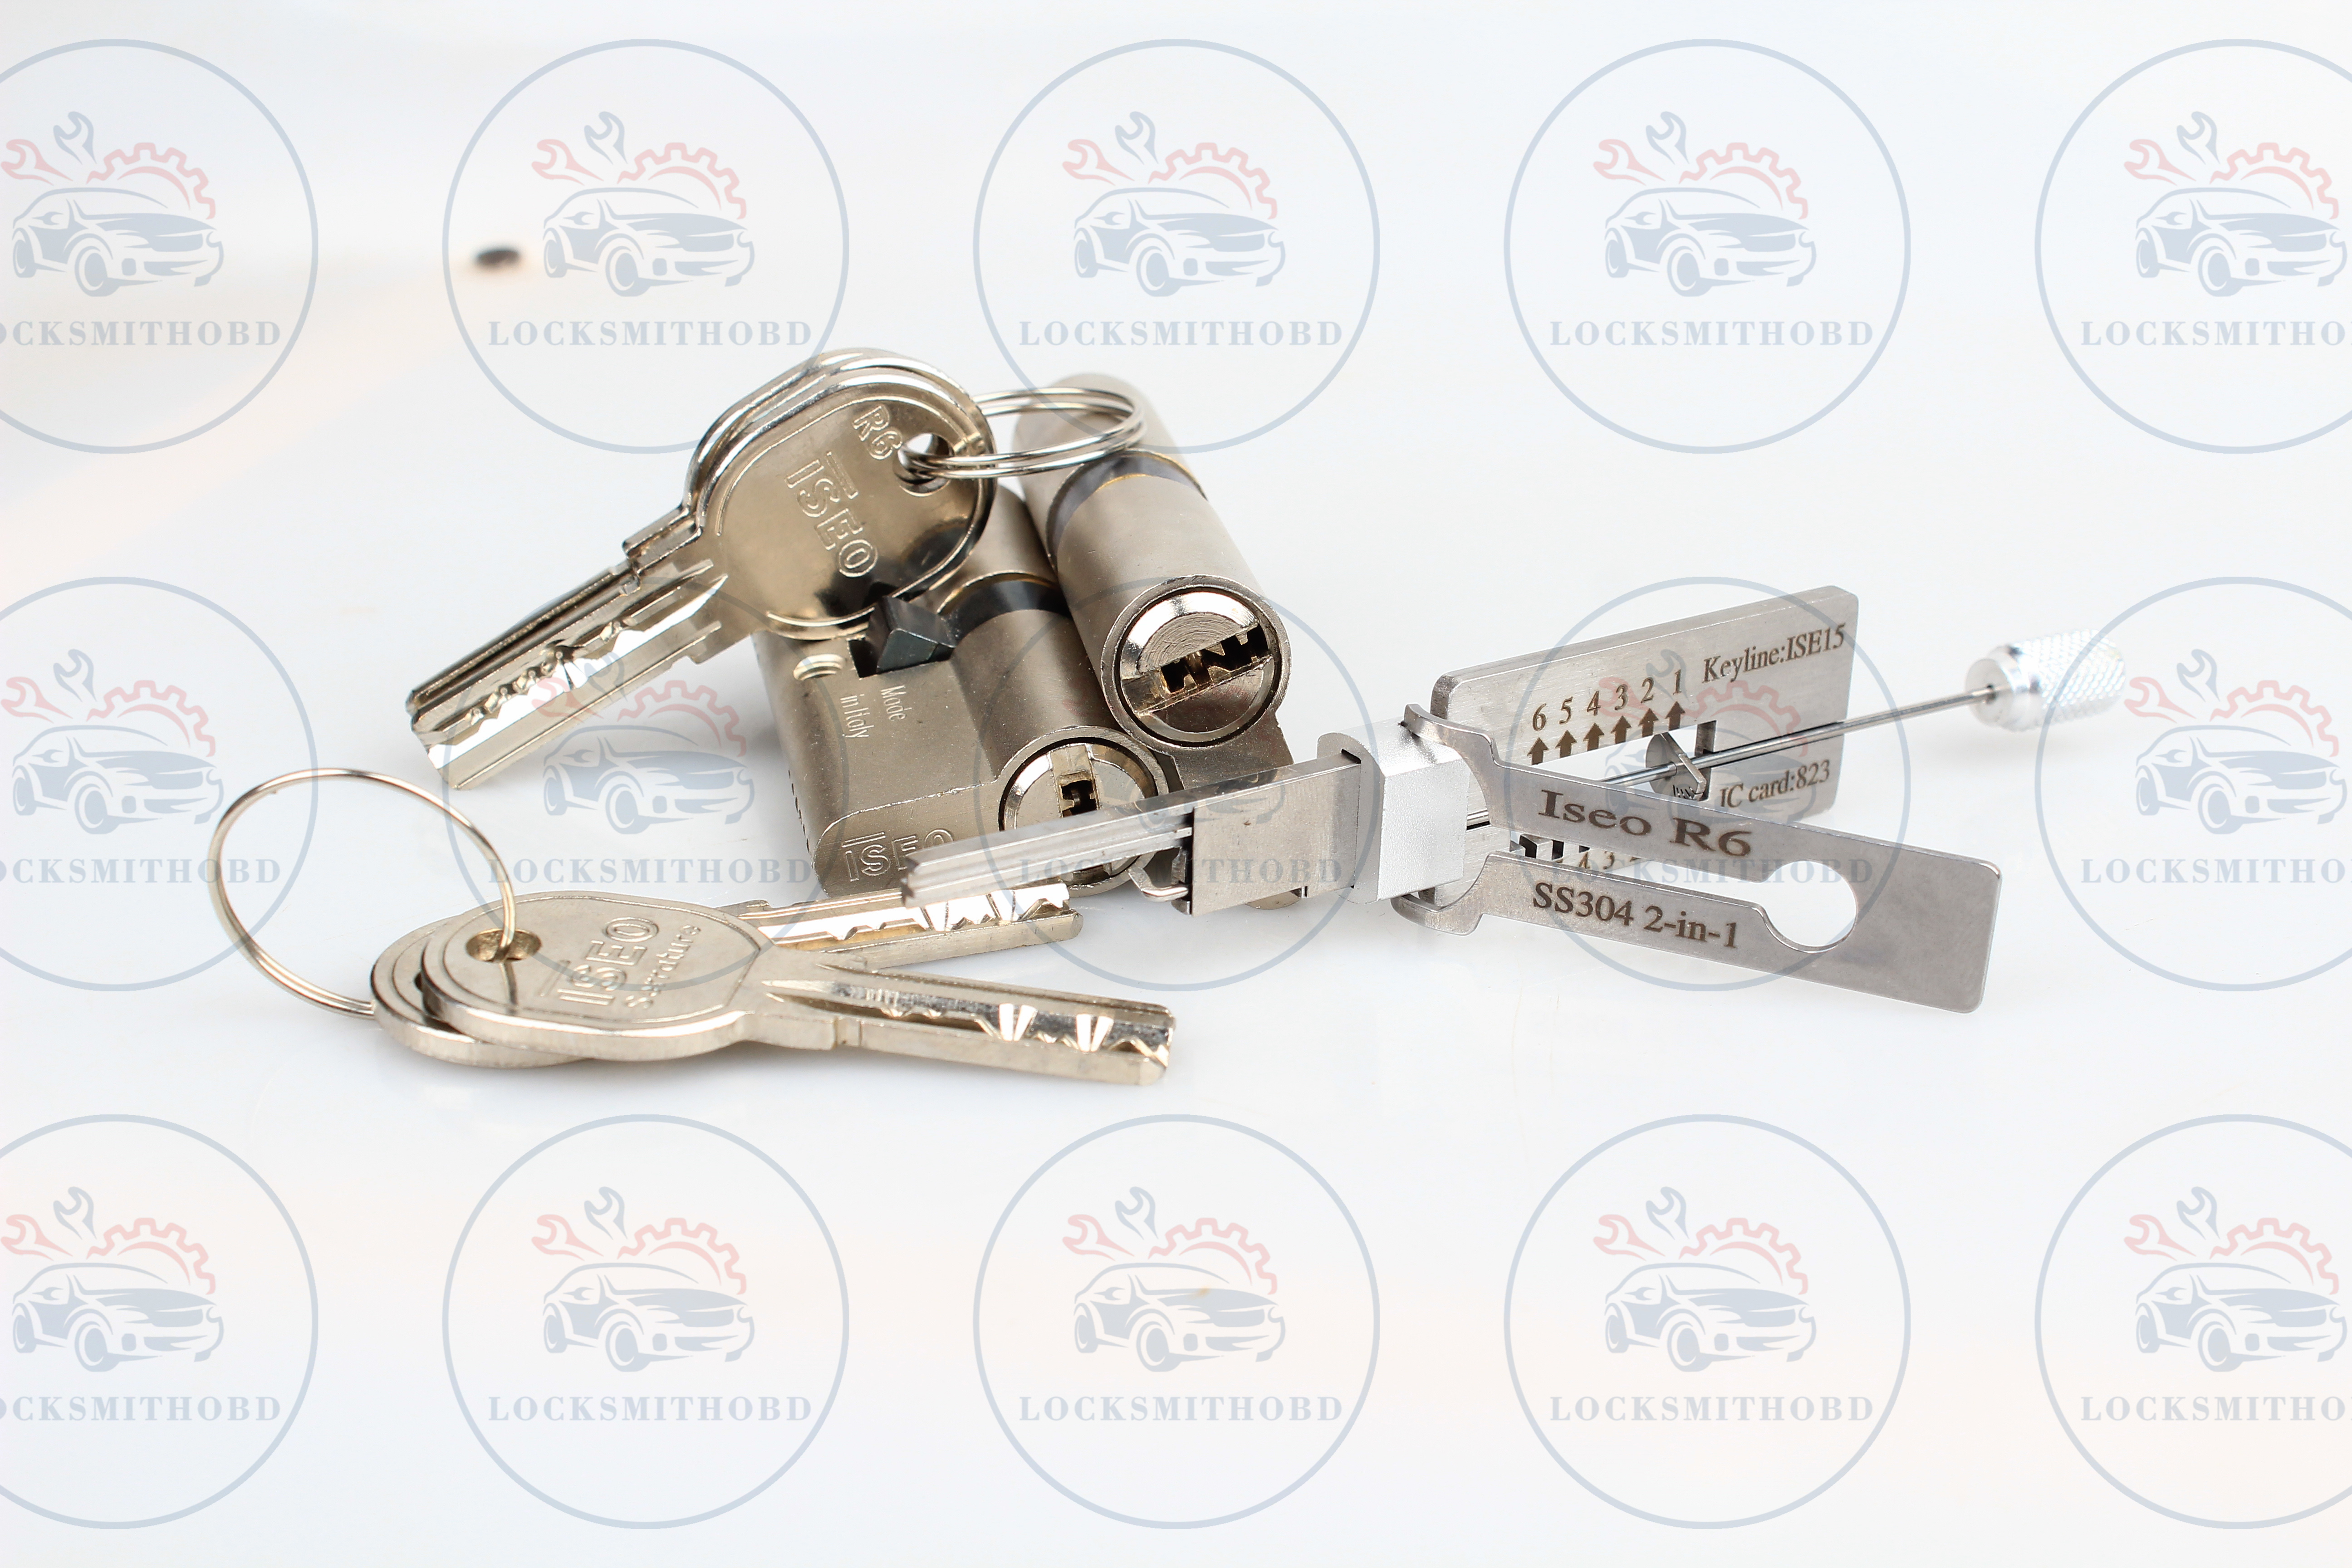 Discount Lishi Style ISEO R6 2-in-1 LockPick And Decoder Open Locksmith Tool